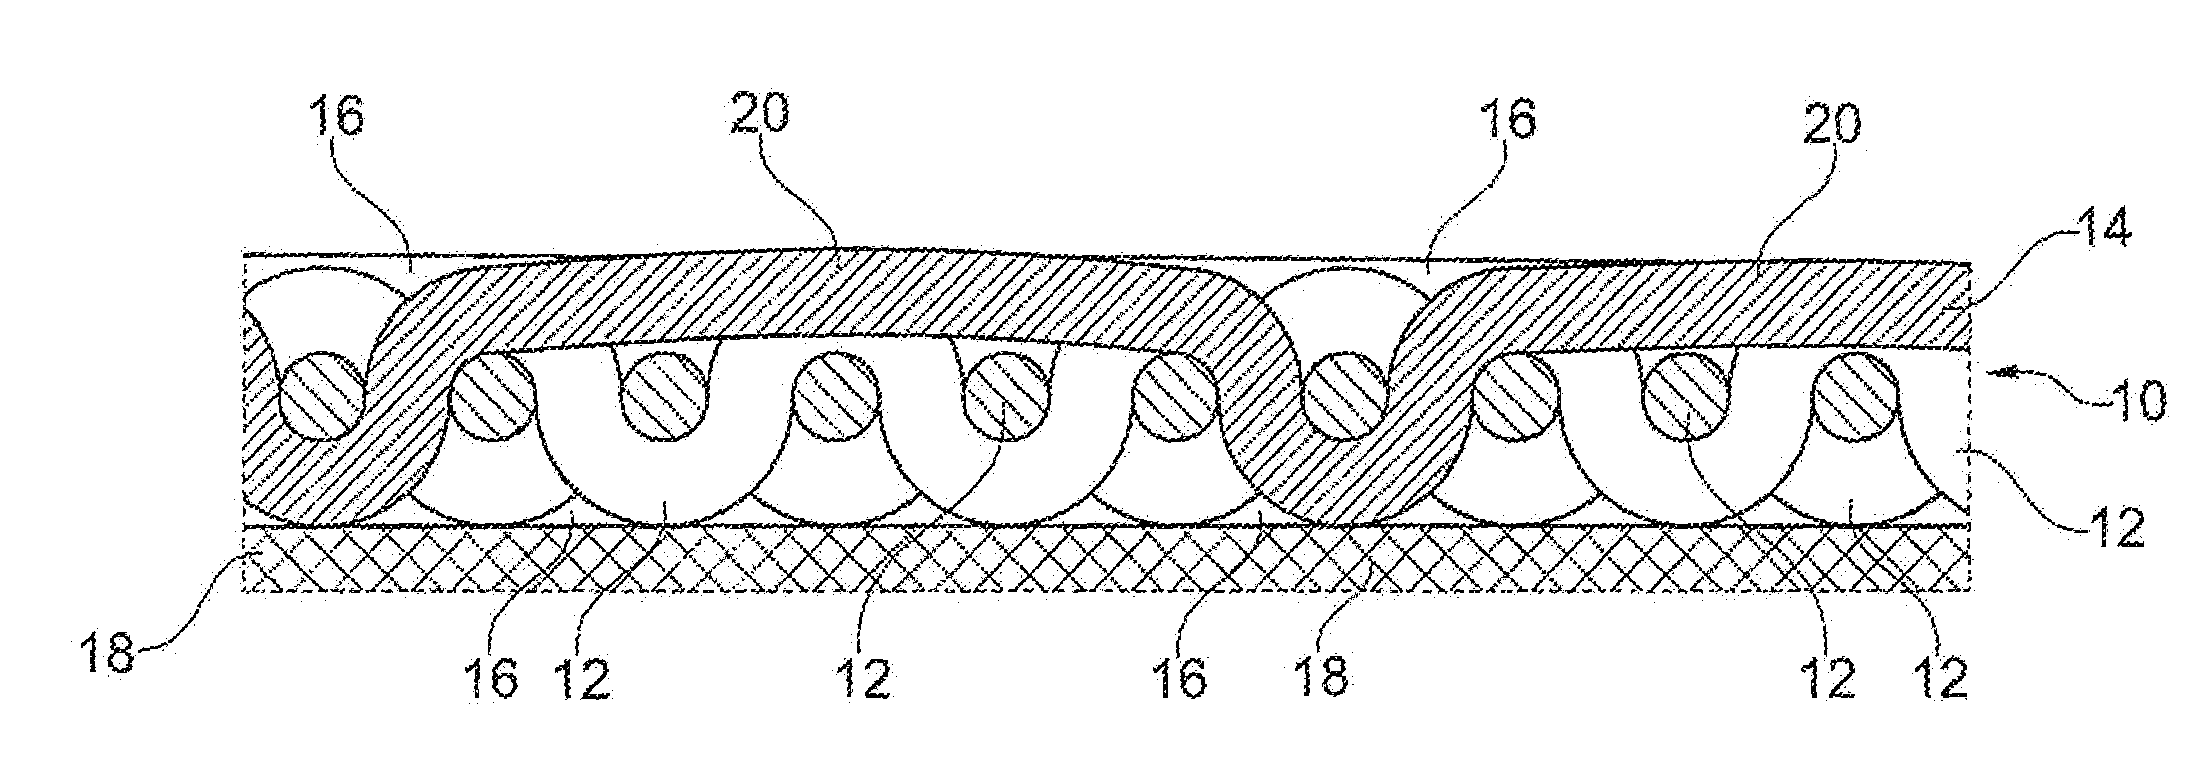 Electrode substrate and planar optoelectronic device